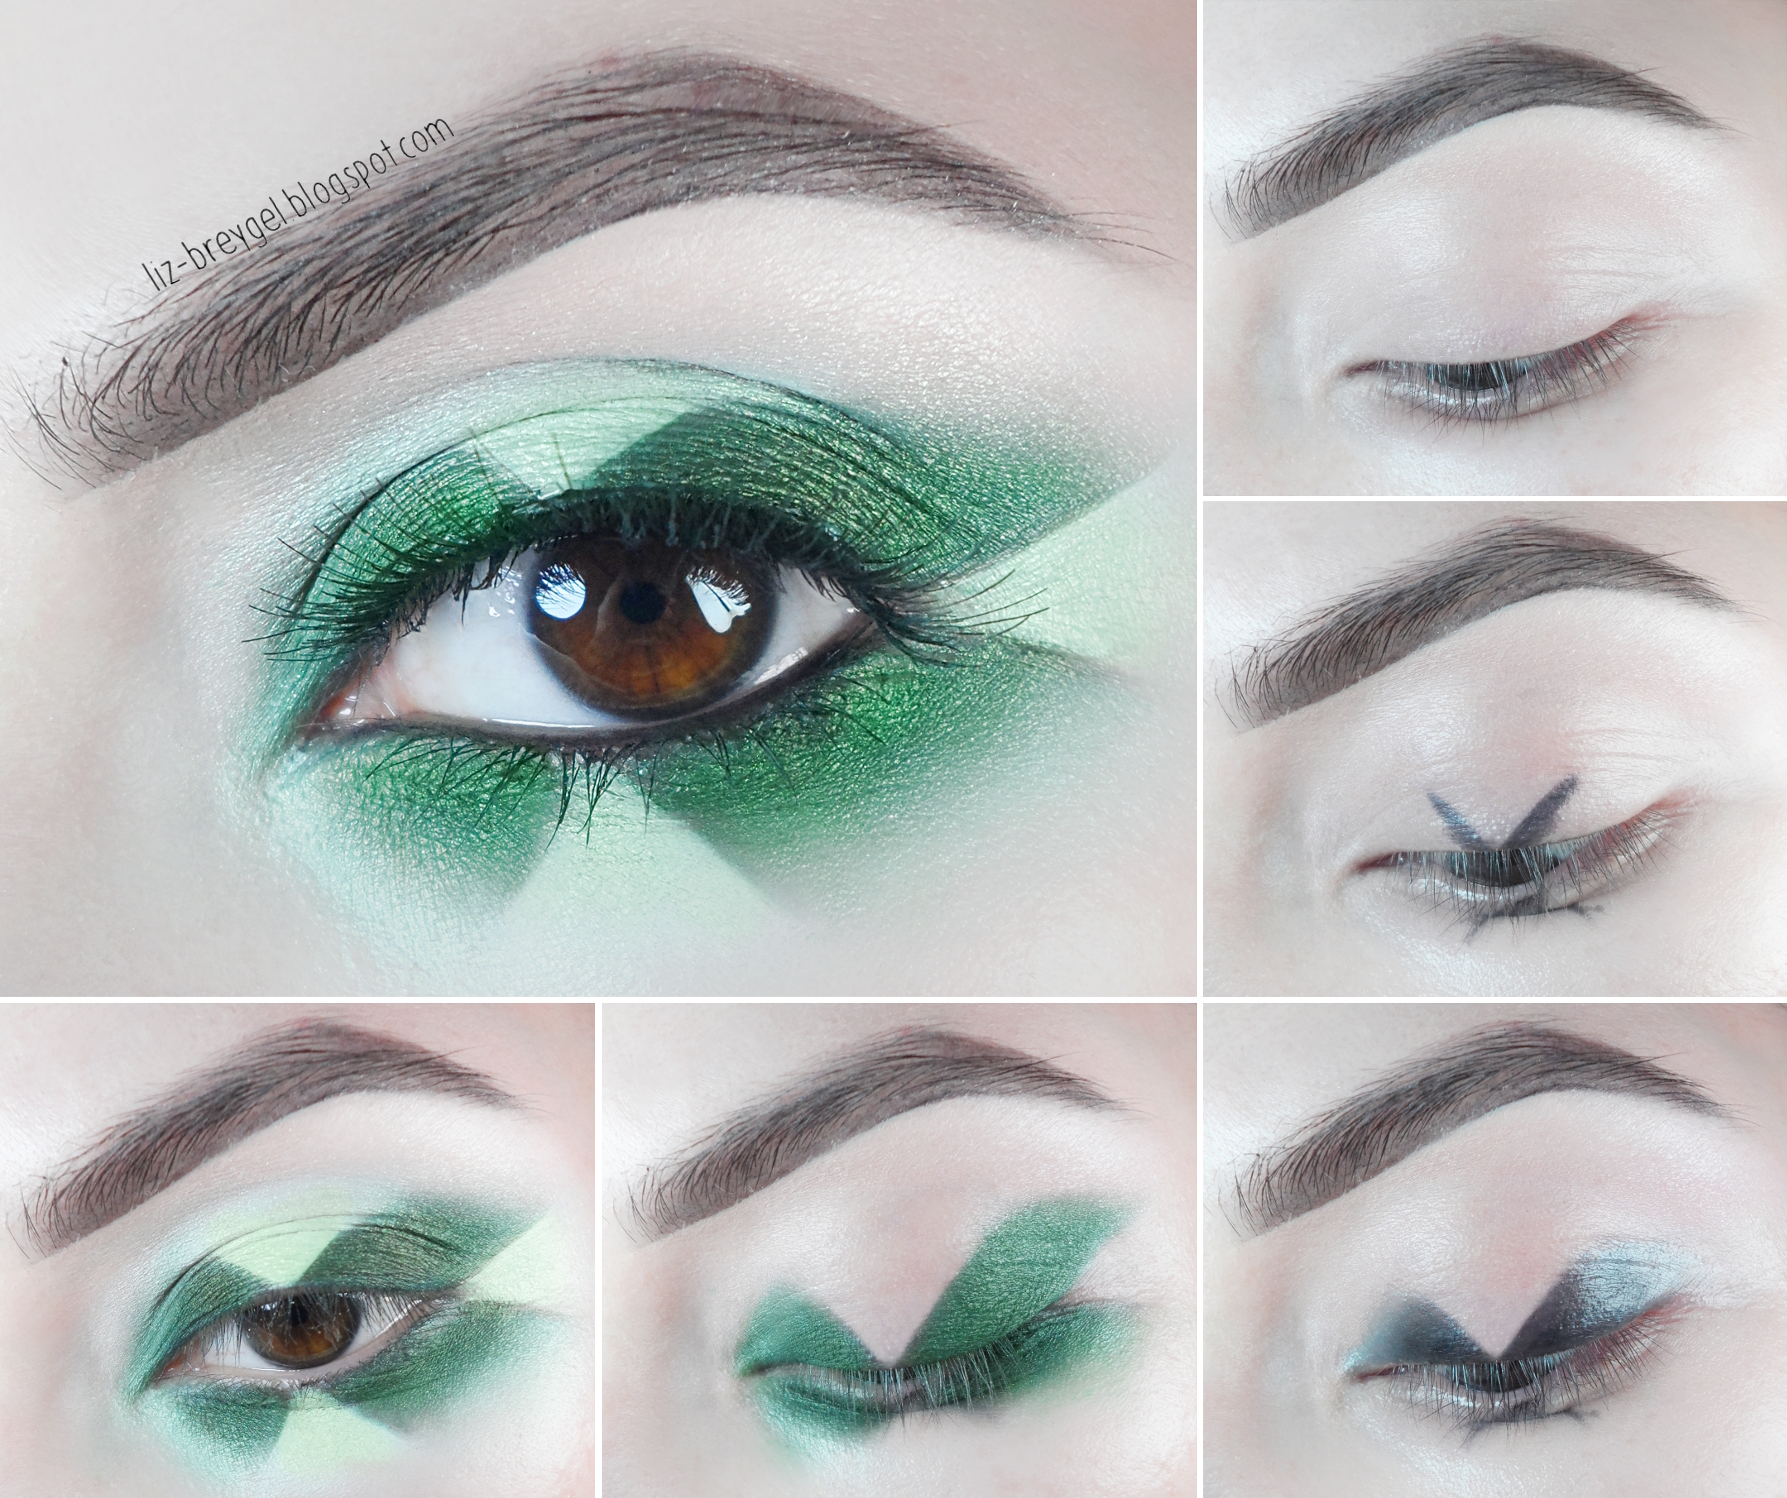 makeup pictorial of a dramatic green eye look inspired by emerald stone